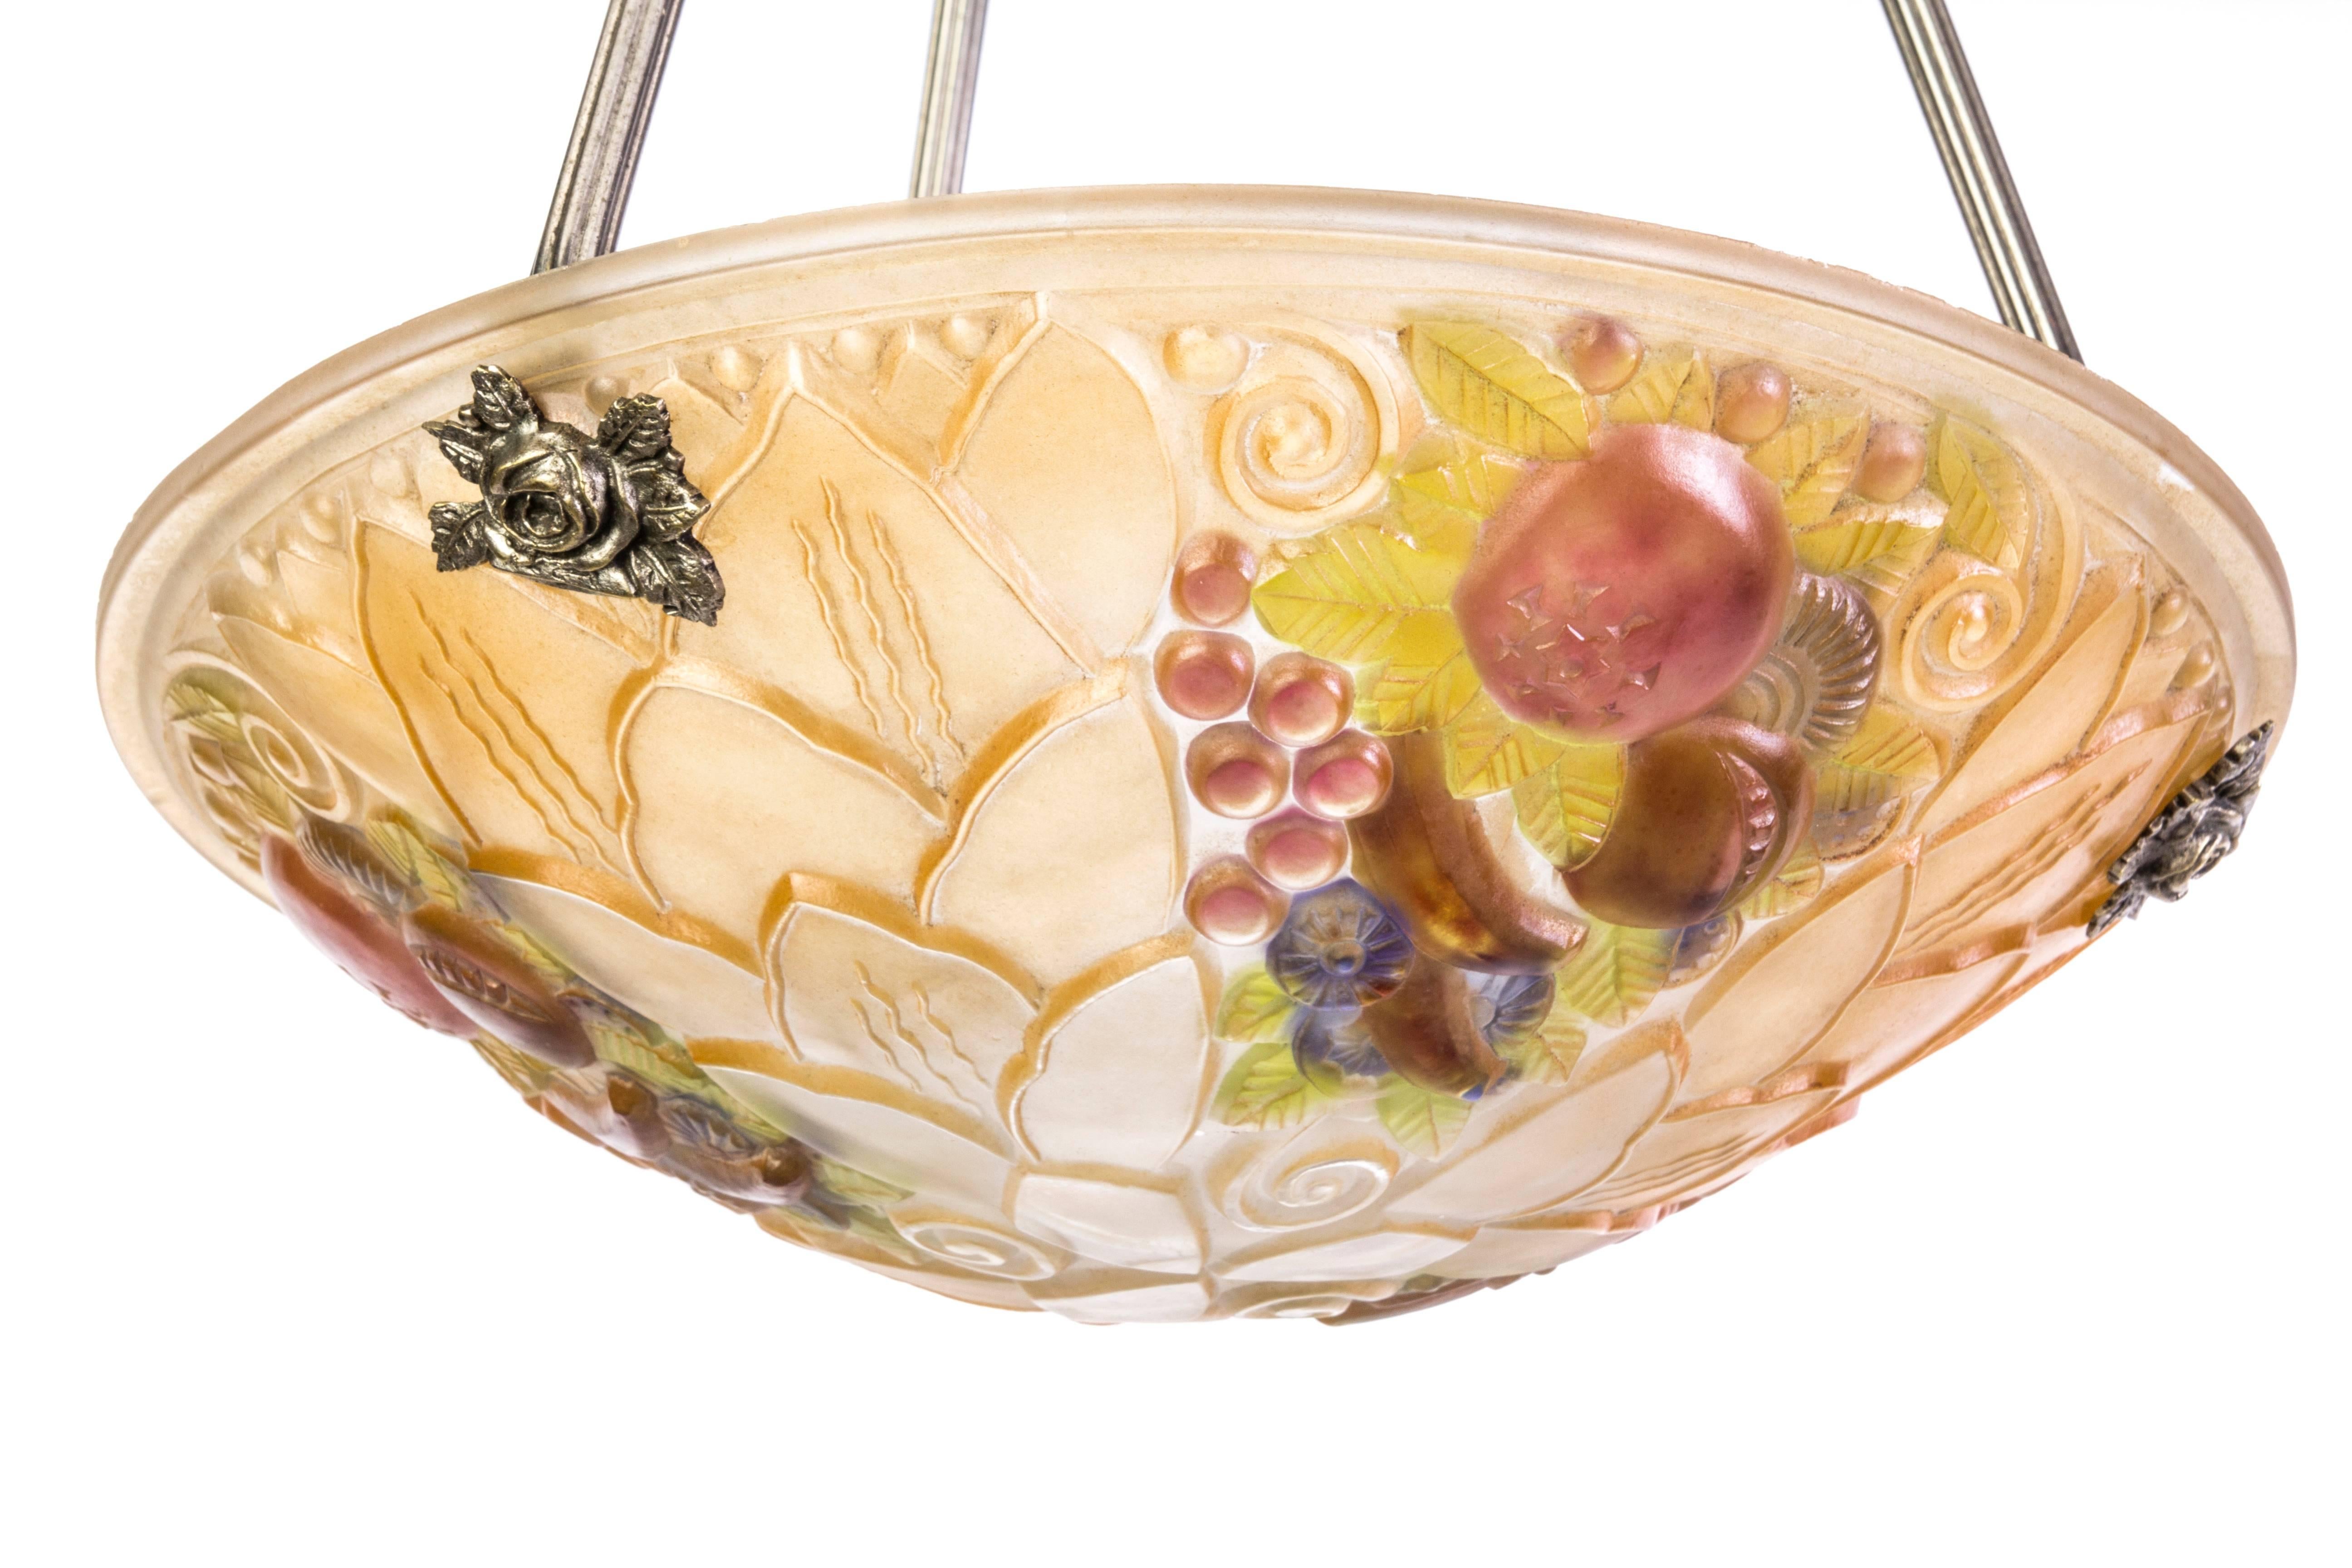 This wonderful early French Art Deco pendant features a gorgeous etched glass bowl with a fruit motif connected to a silver plated bronze frame.